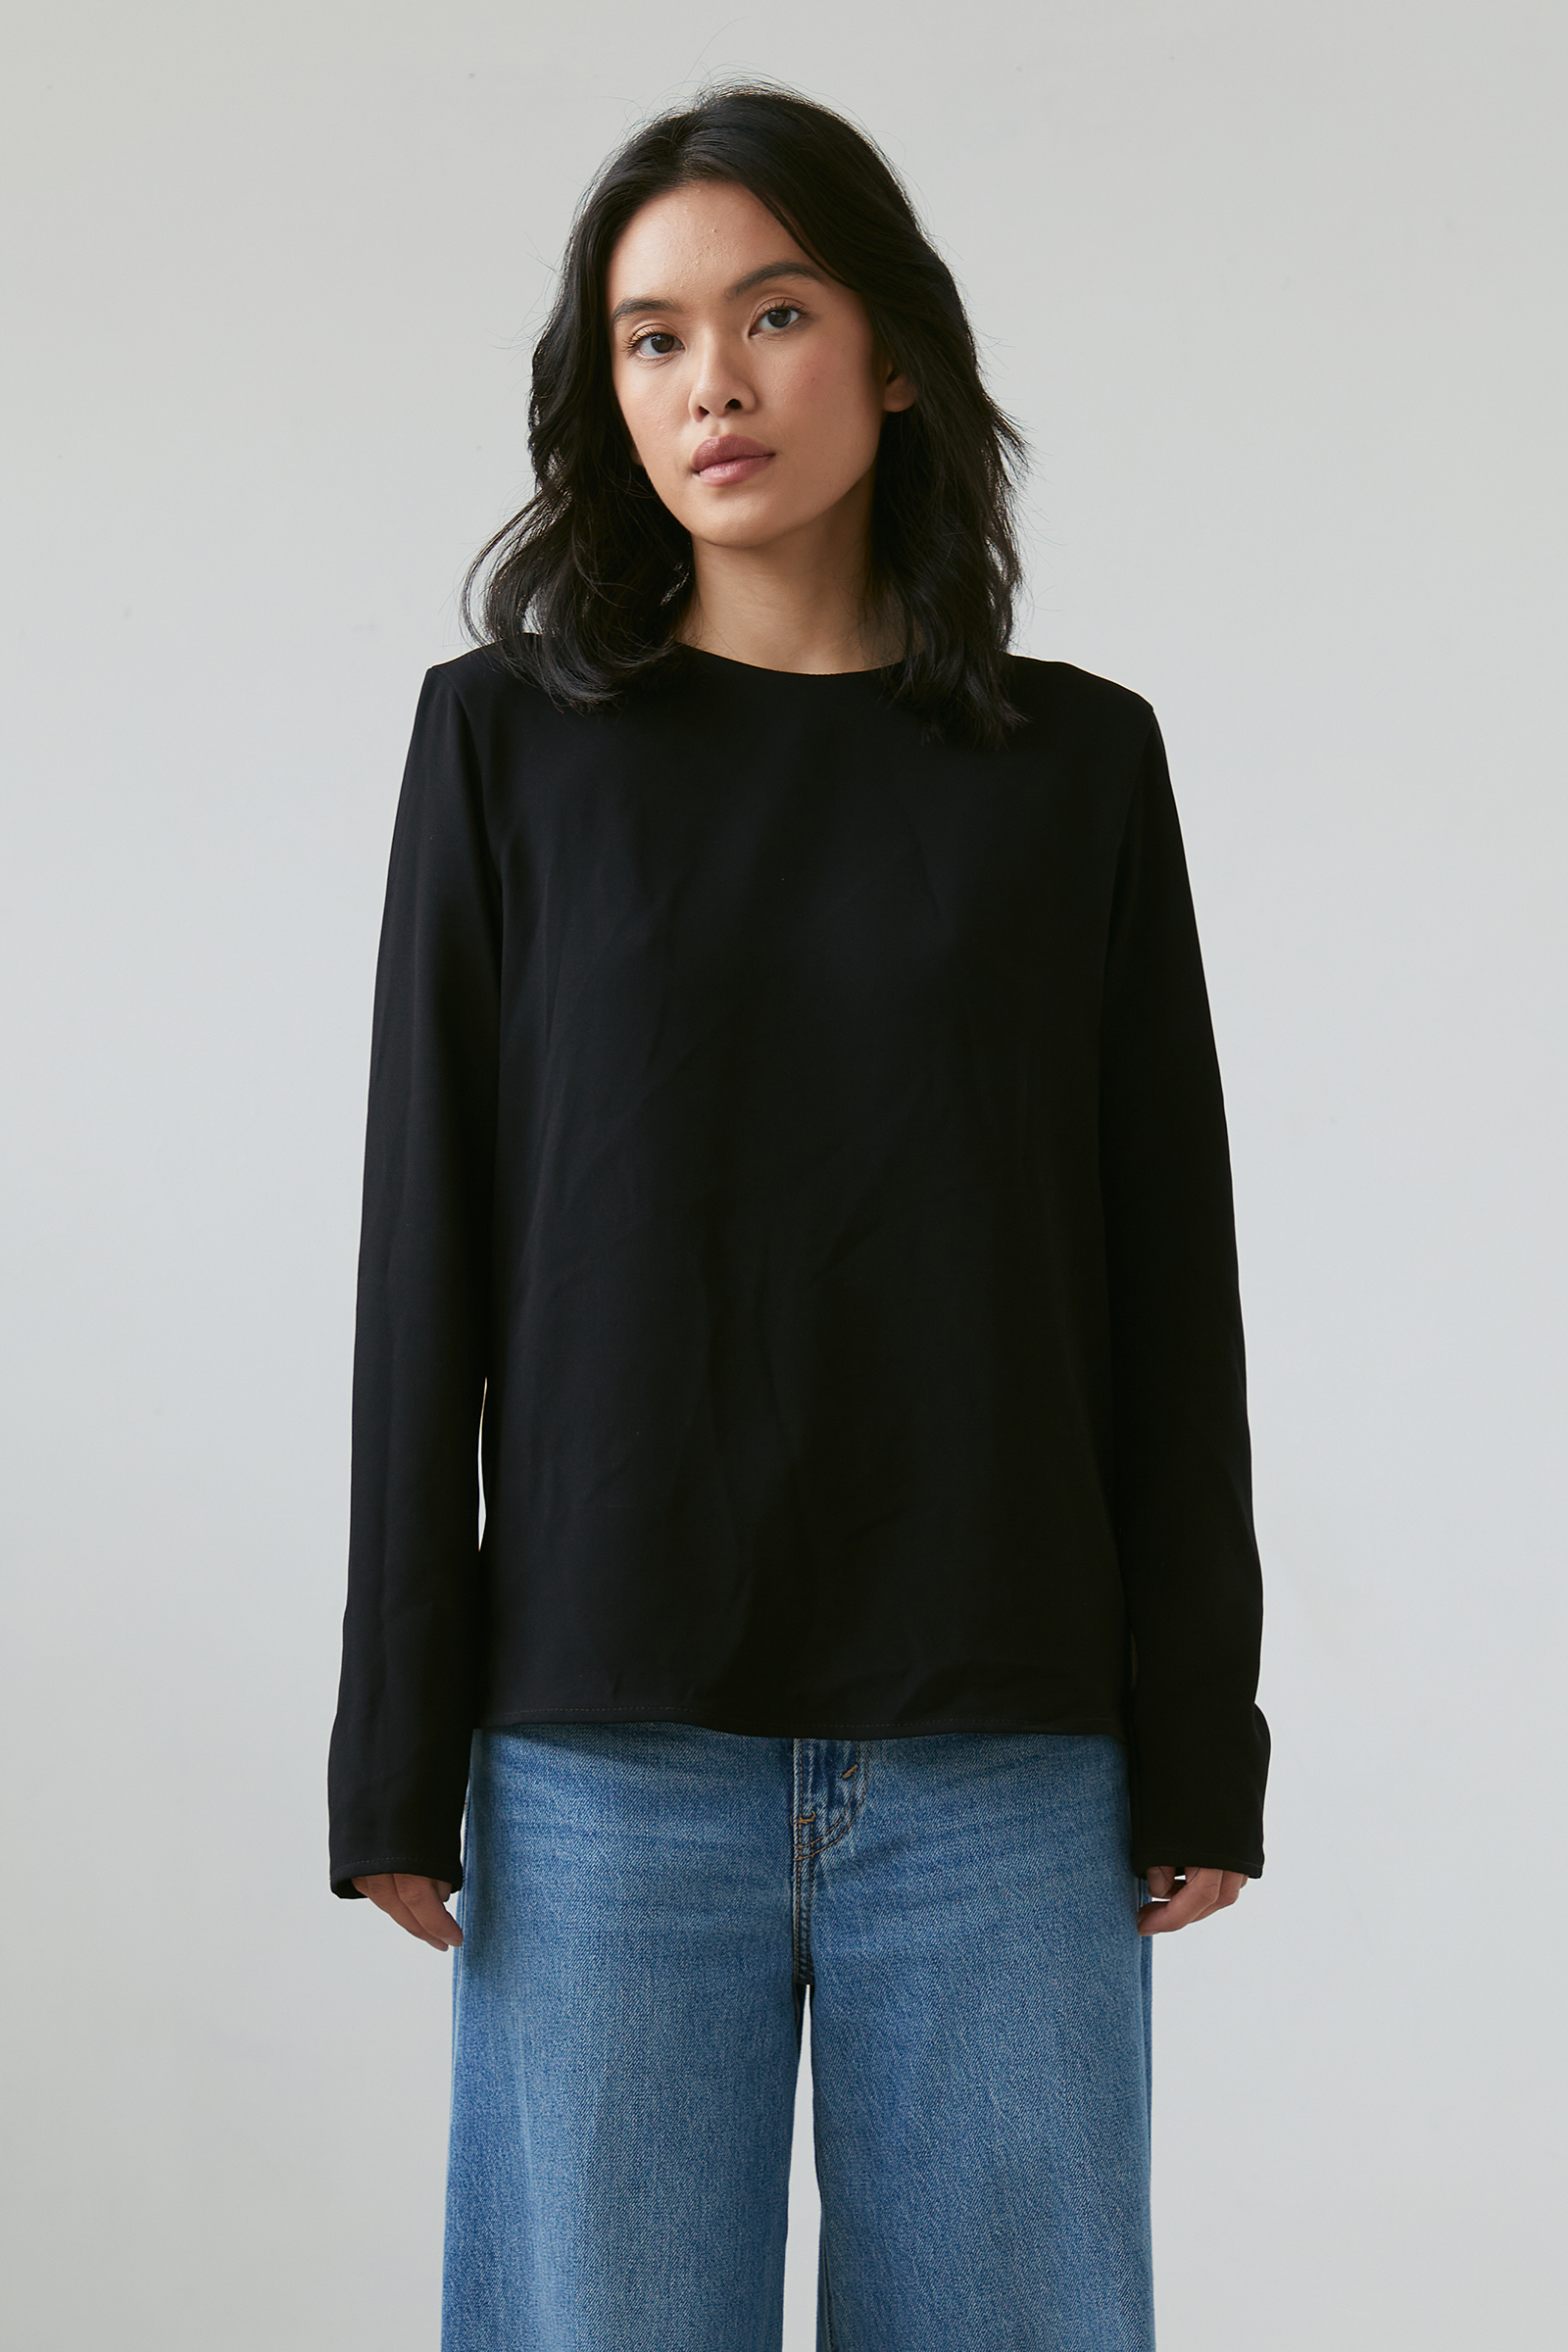 Universal Blouse in Black